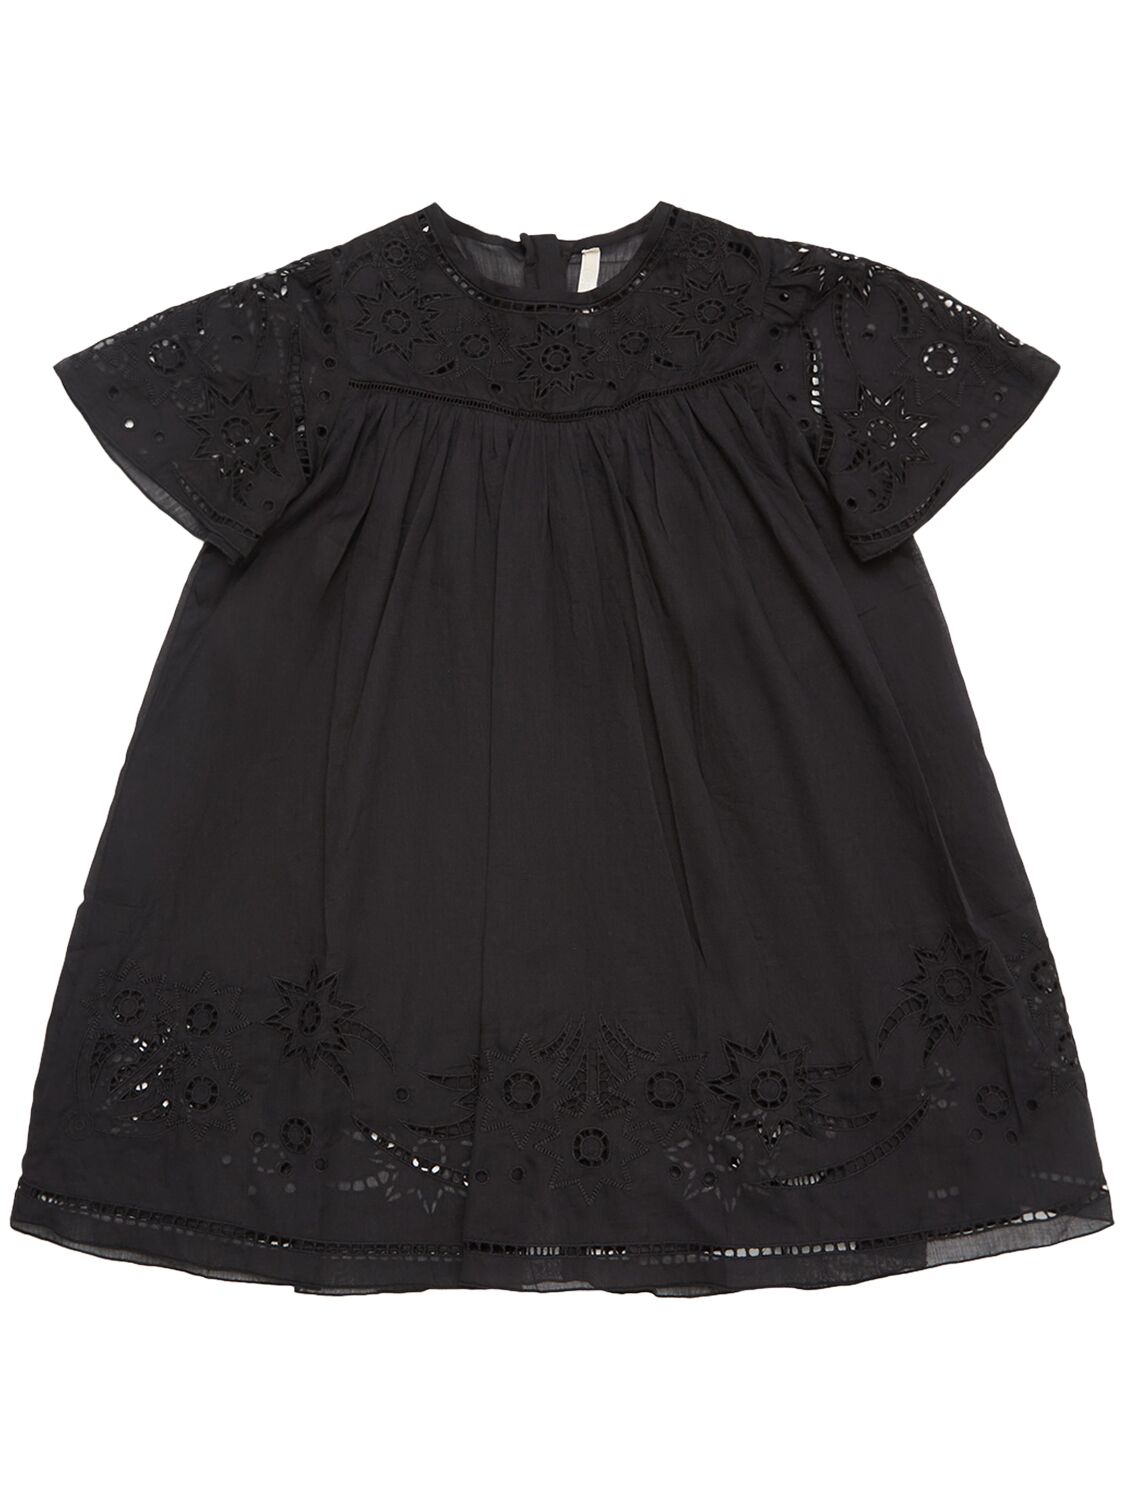 Chloé Kids' Embroidered Cotton Dress In Black